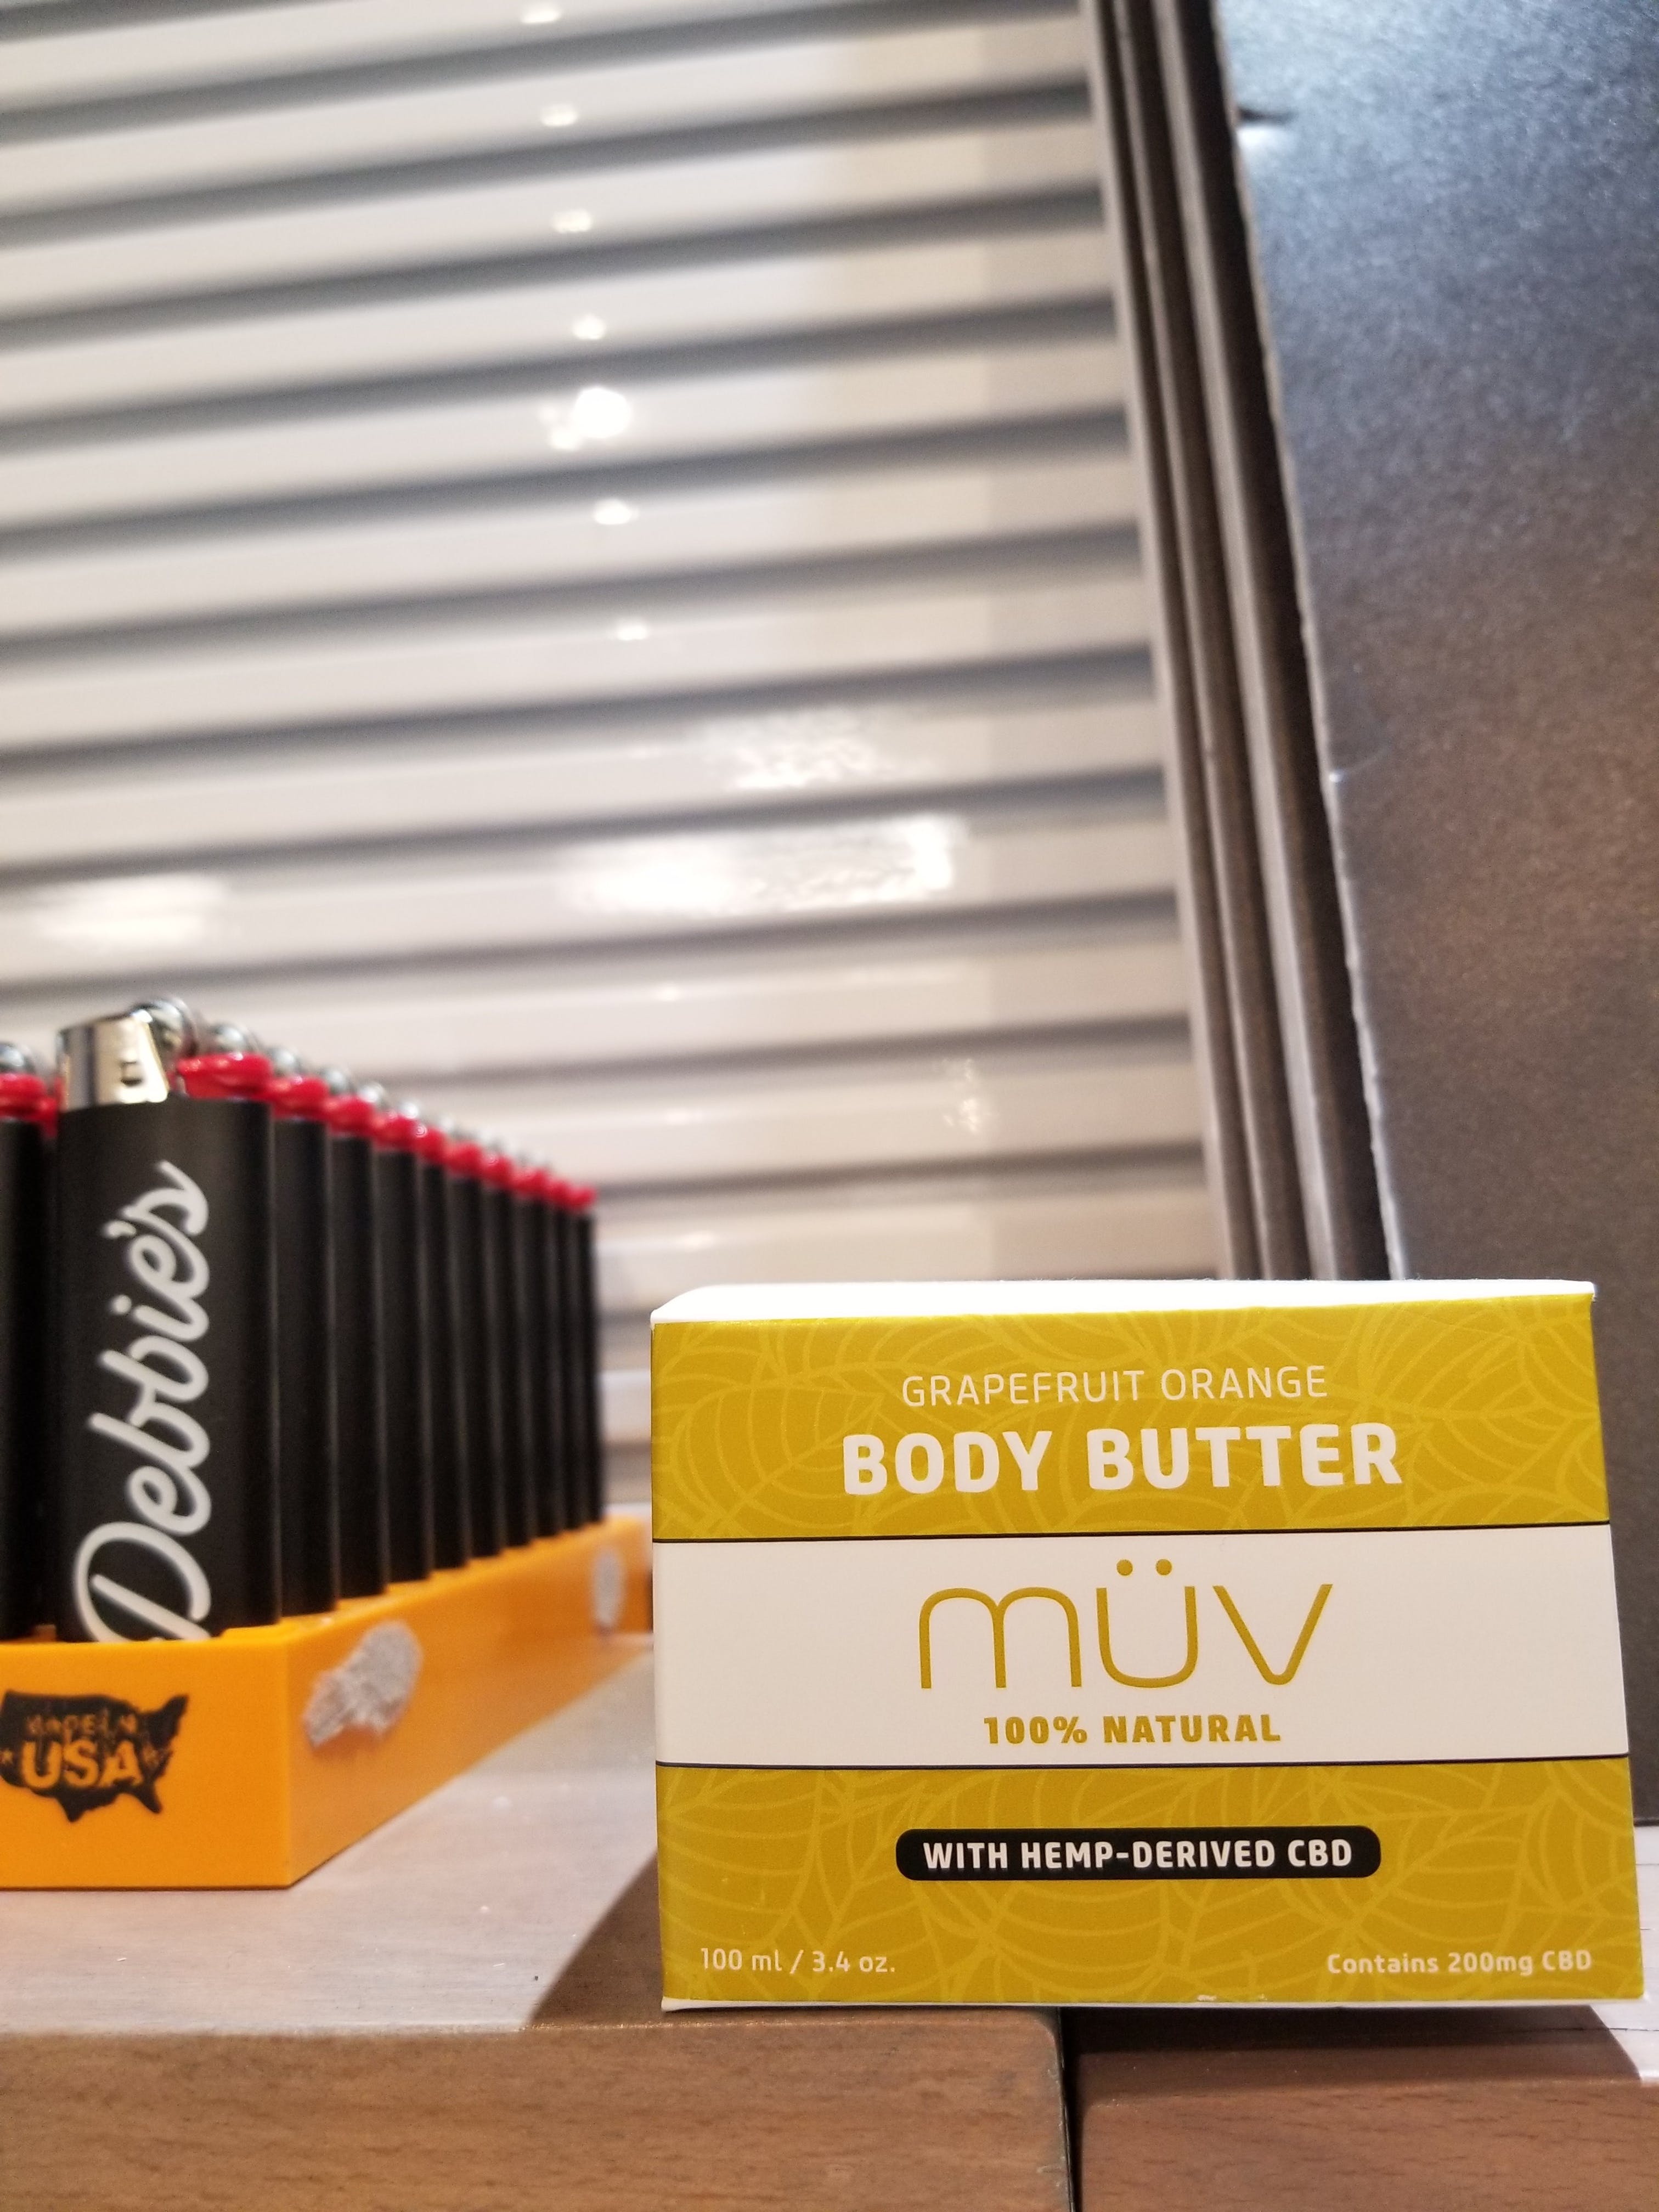 topicals-ma-c2-9cv-cannabis-infused-products-muv-cbd-body-butter